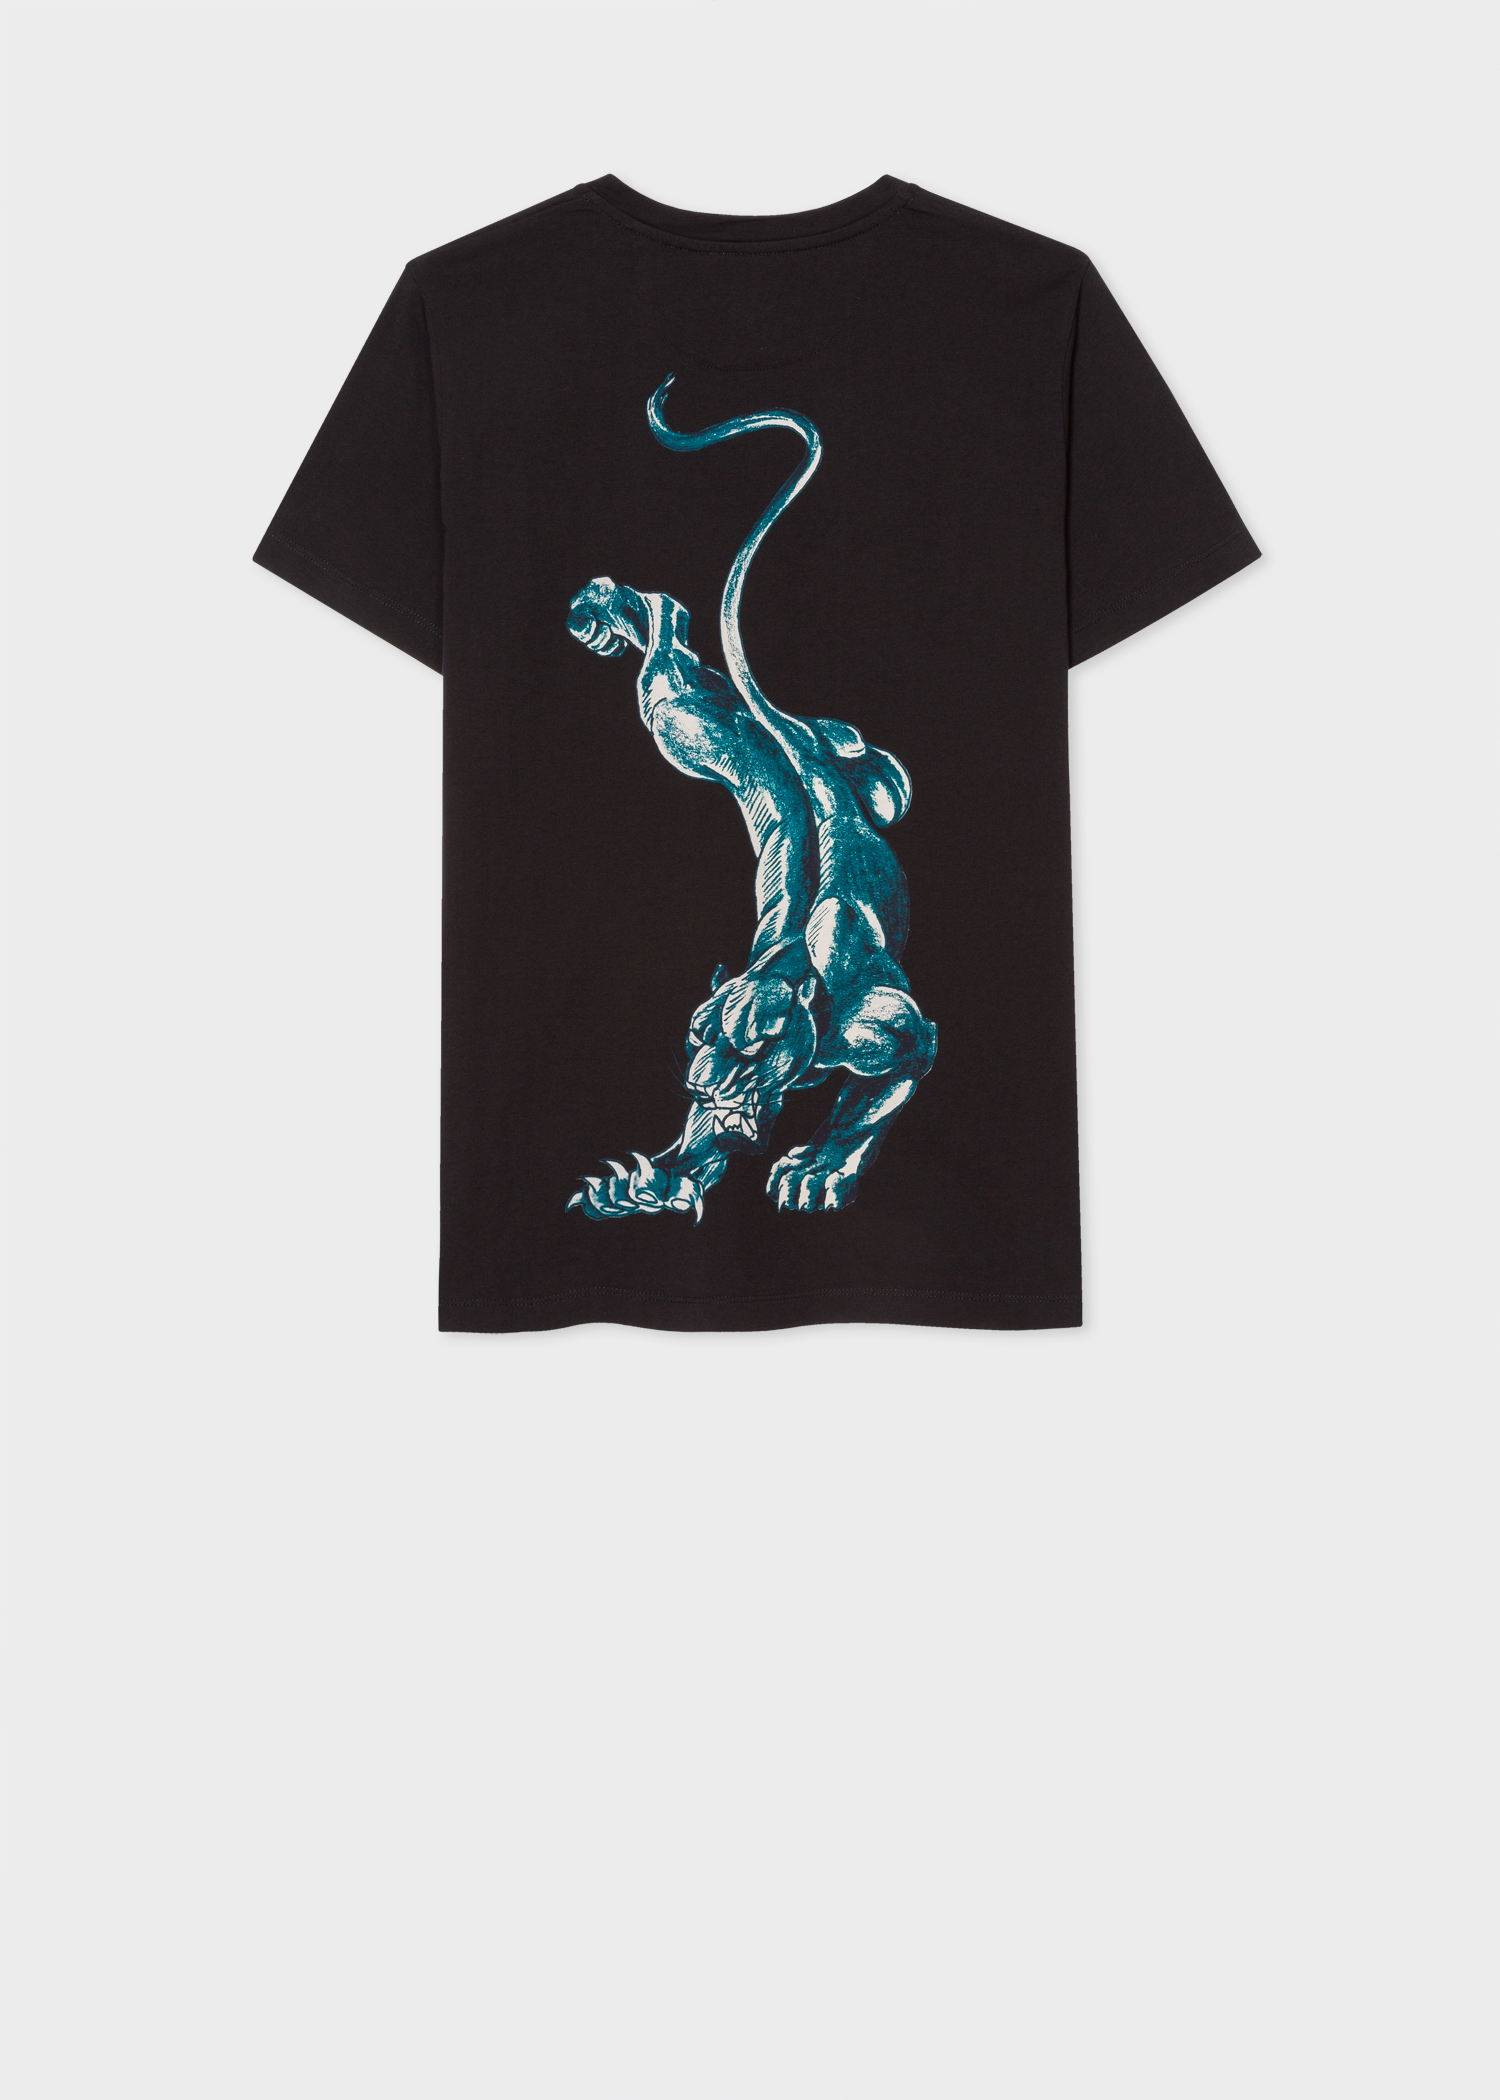 Back print view - Paul Smith + Mark Mahoney - Women's Black T-Shirt With Panther Back Print Paul Smith